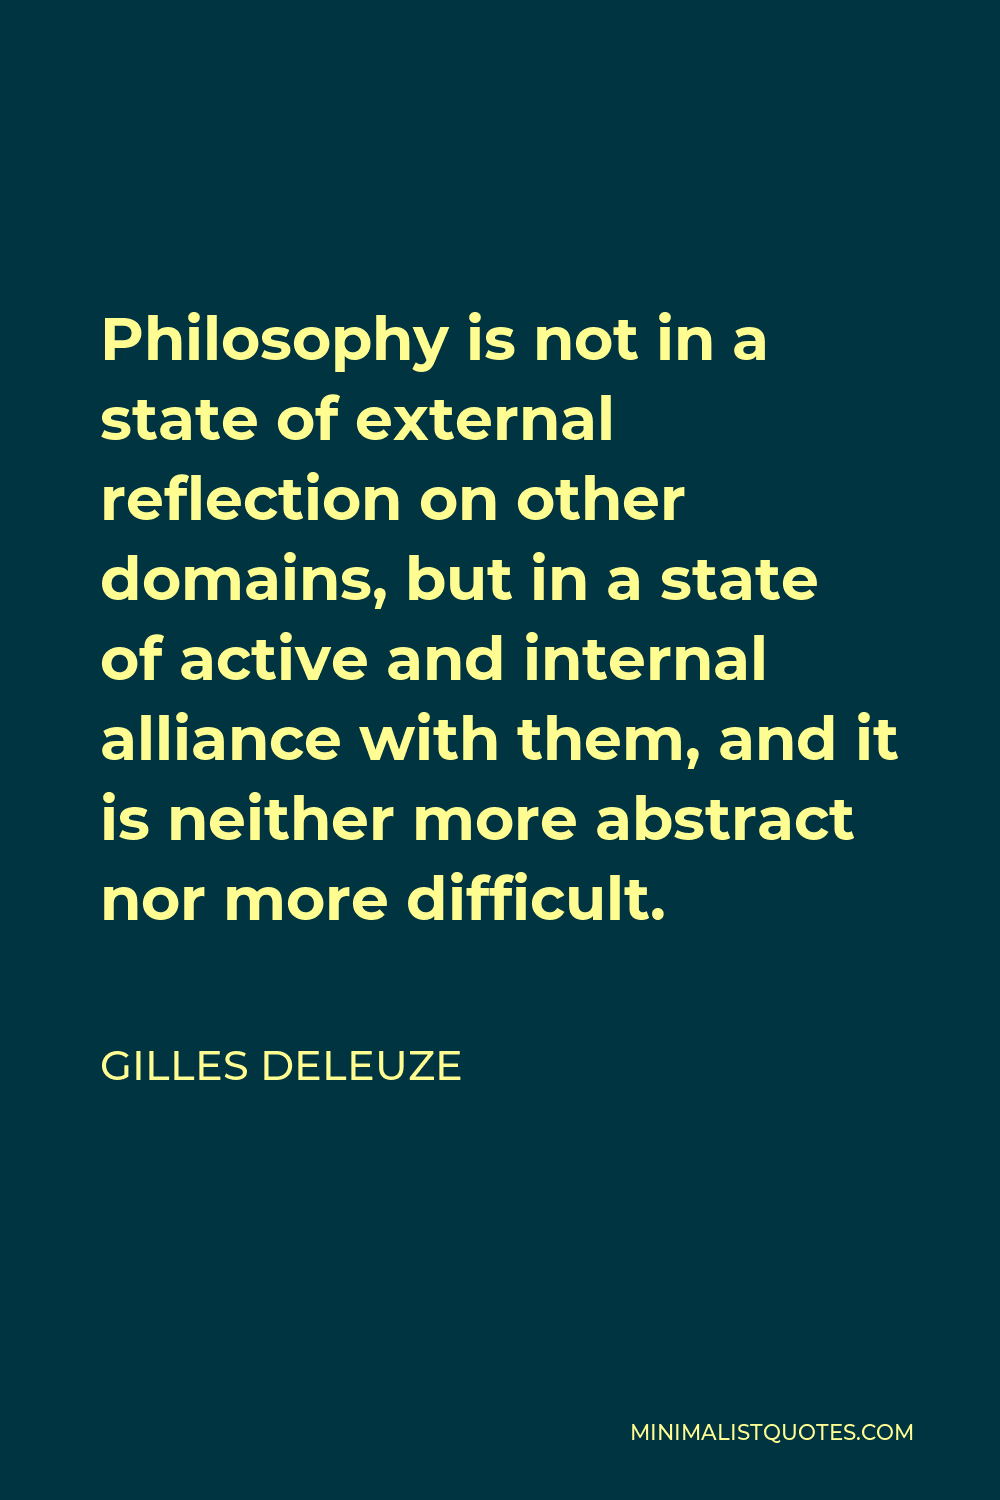 Gilles Deleuze Quote - Philosophy is not in a state of external reflection on other domains, but in a state of active and internal alliance with them, and it is neither more abstract nor more difficult.